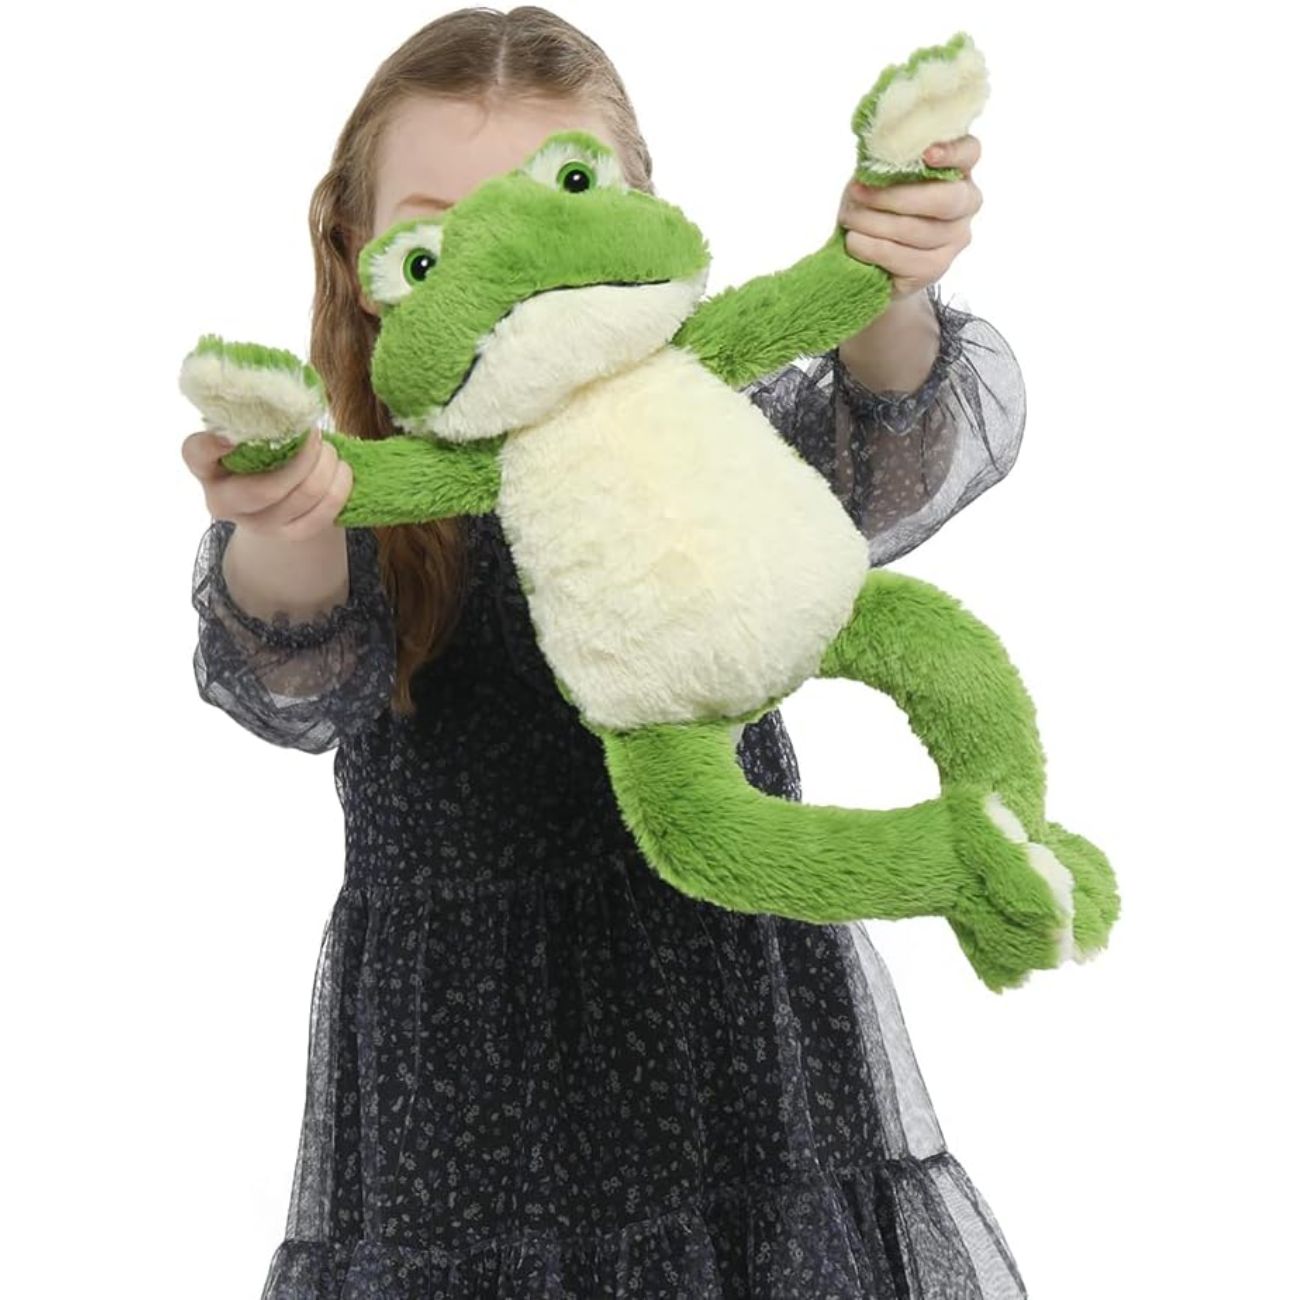 Sitting Frog Stuffed Animal Toy, Green,17.7 Inches